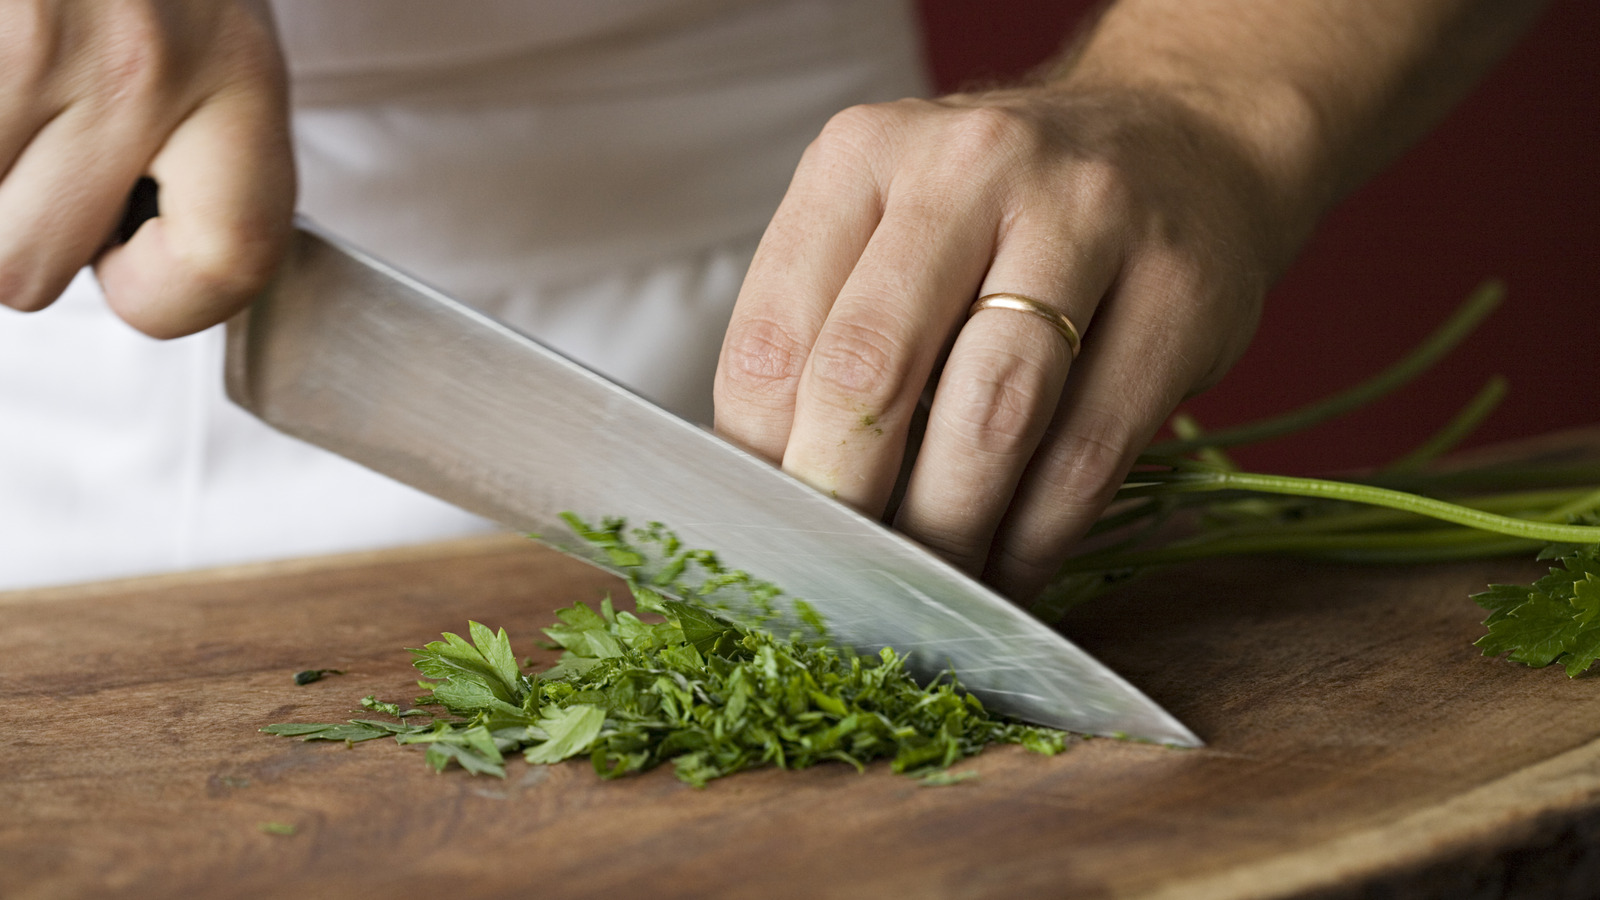 The Rubber Cutting Board That Professional Chefs Swear By